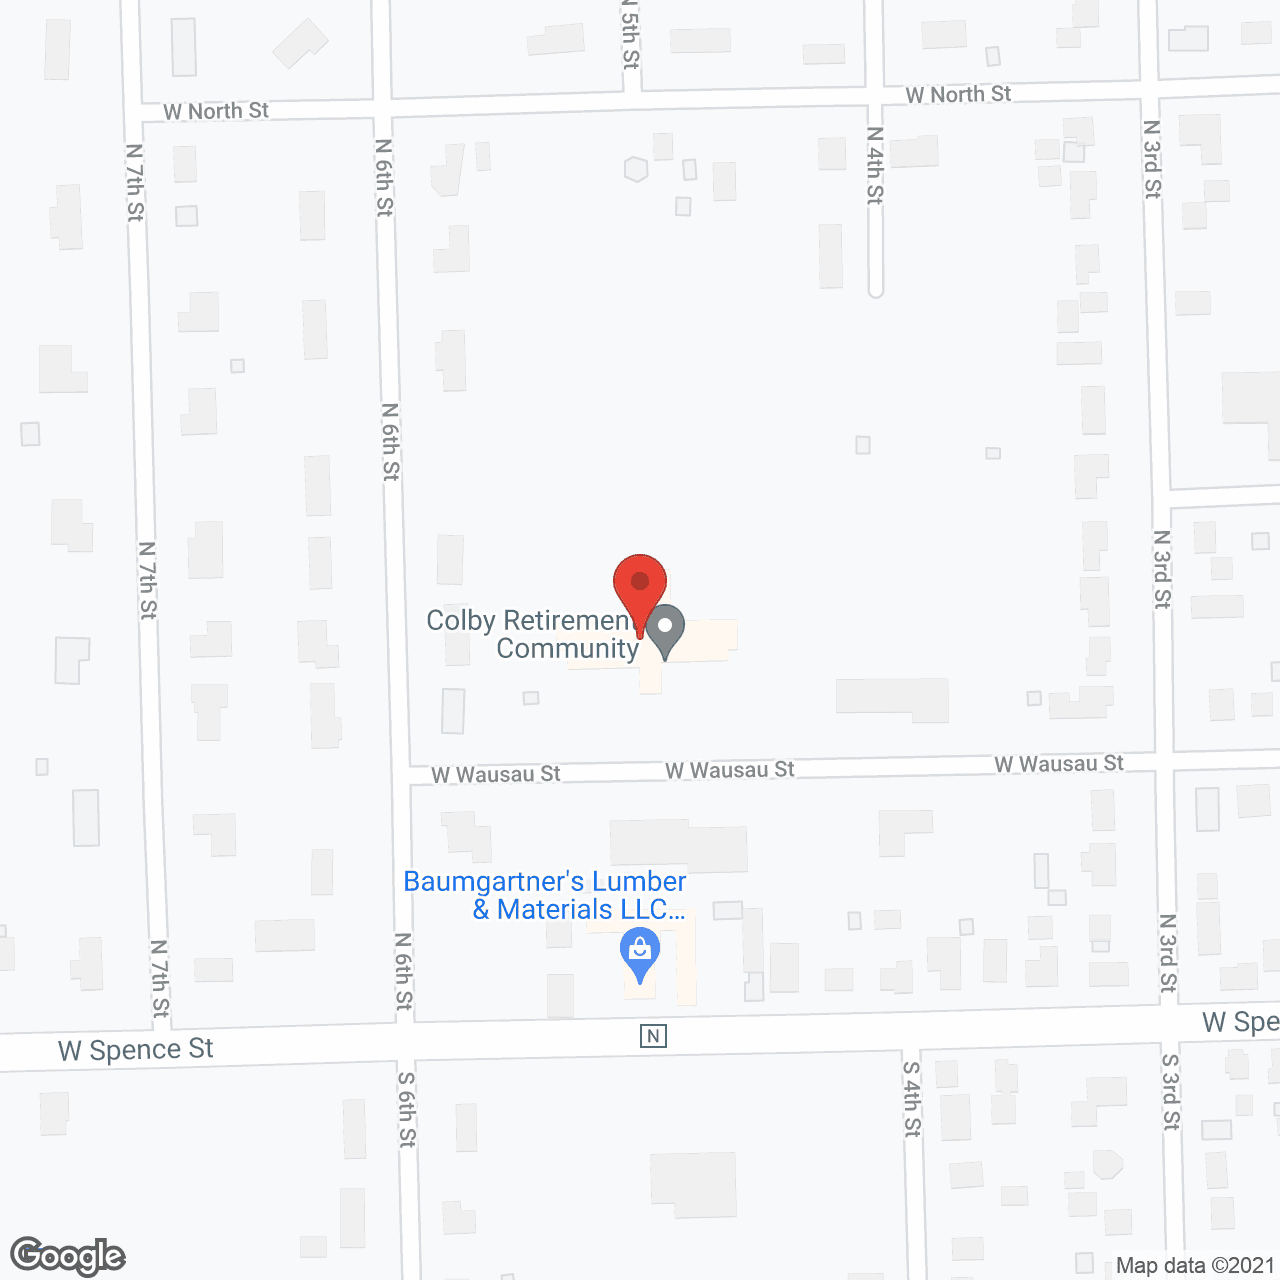 Colby Retirement Community in google map